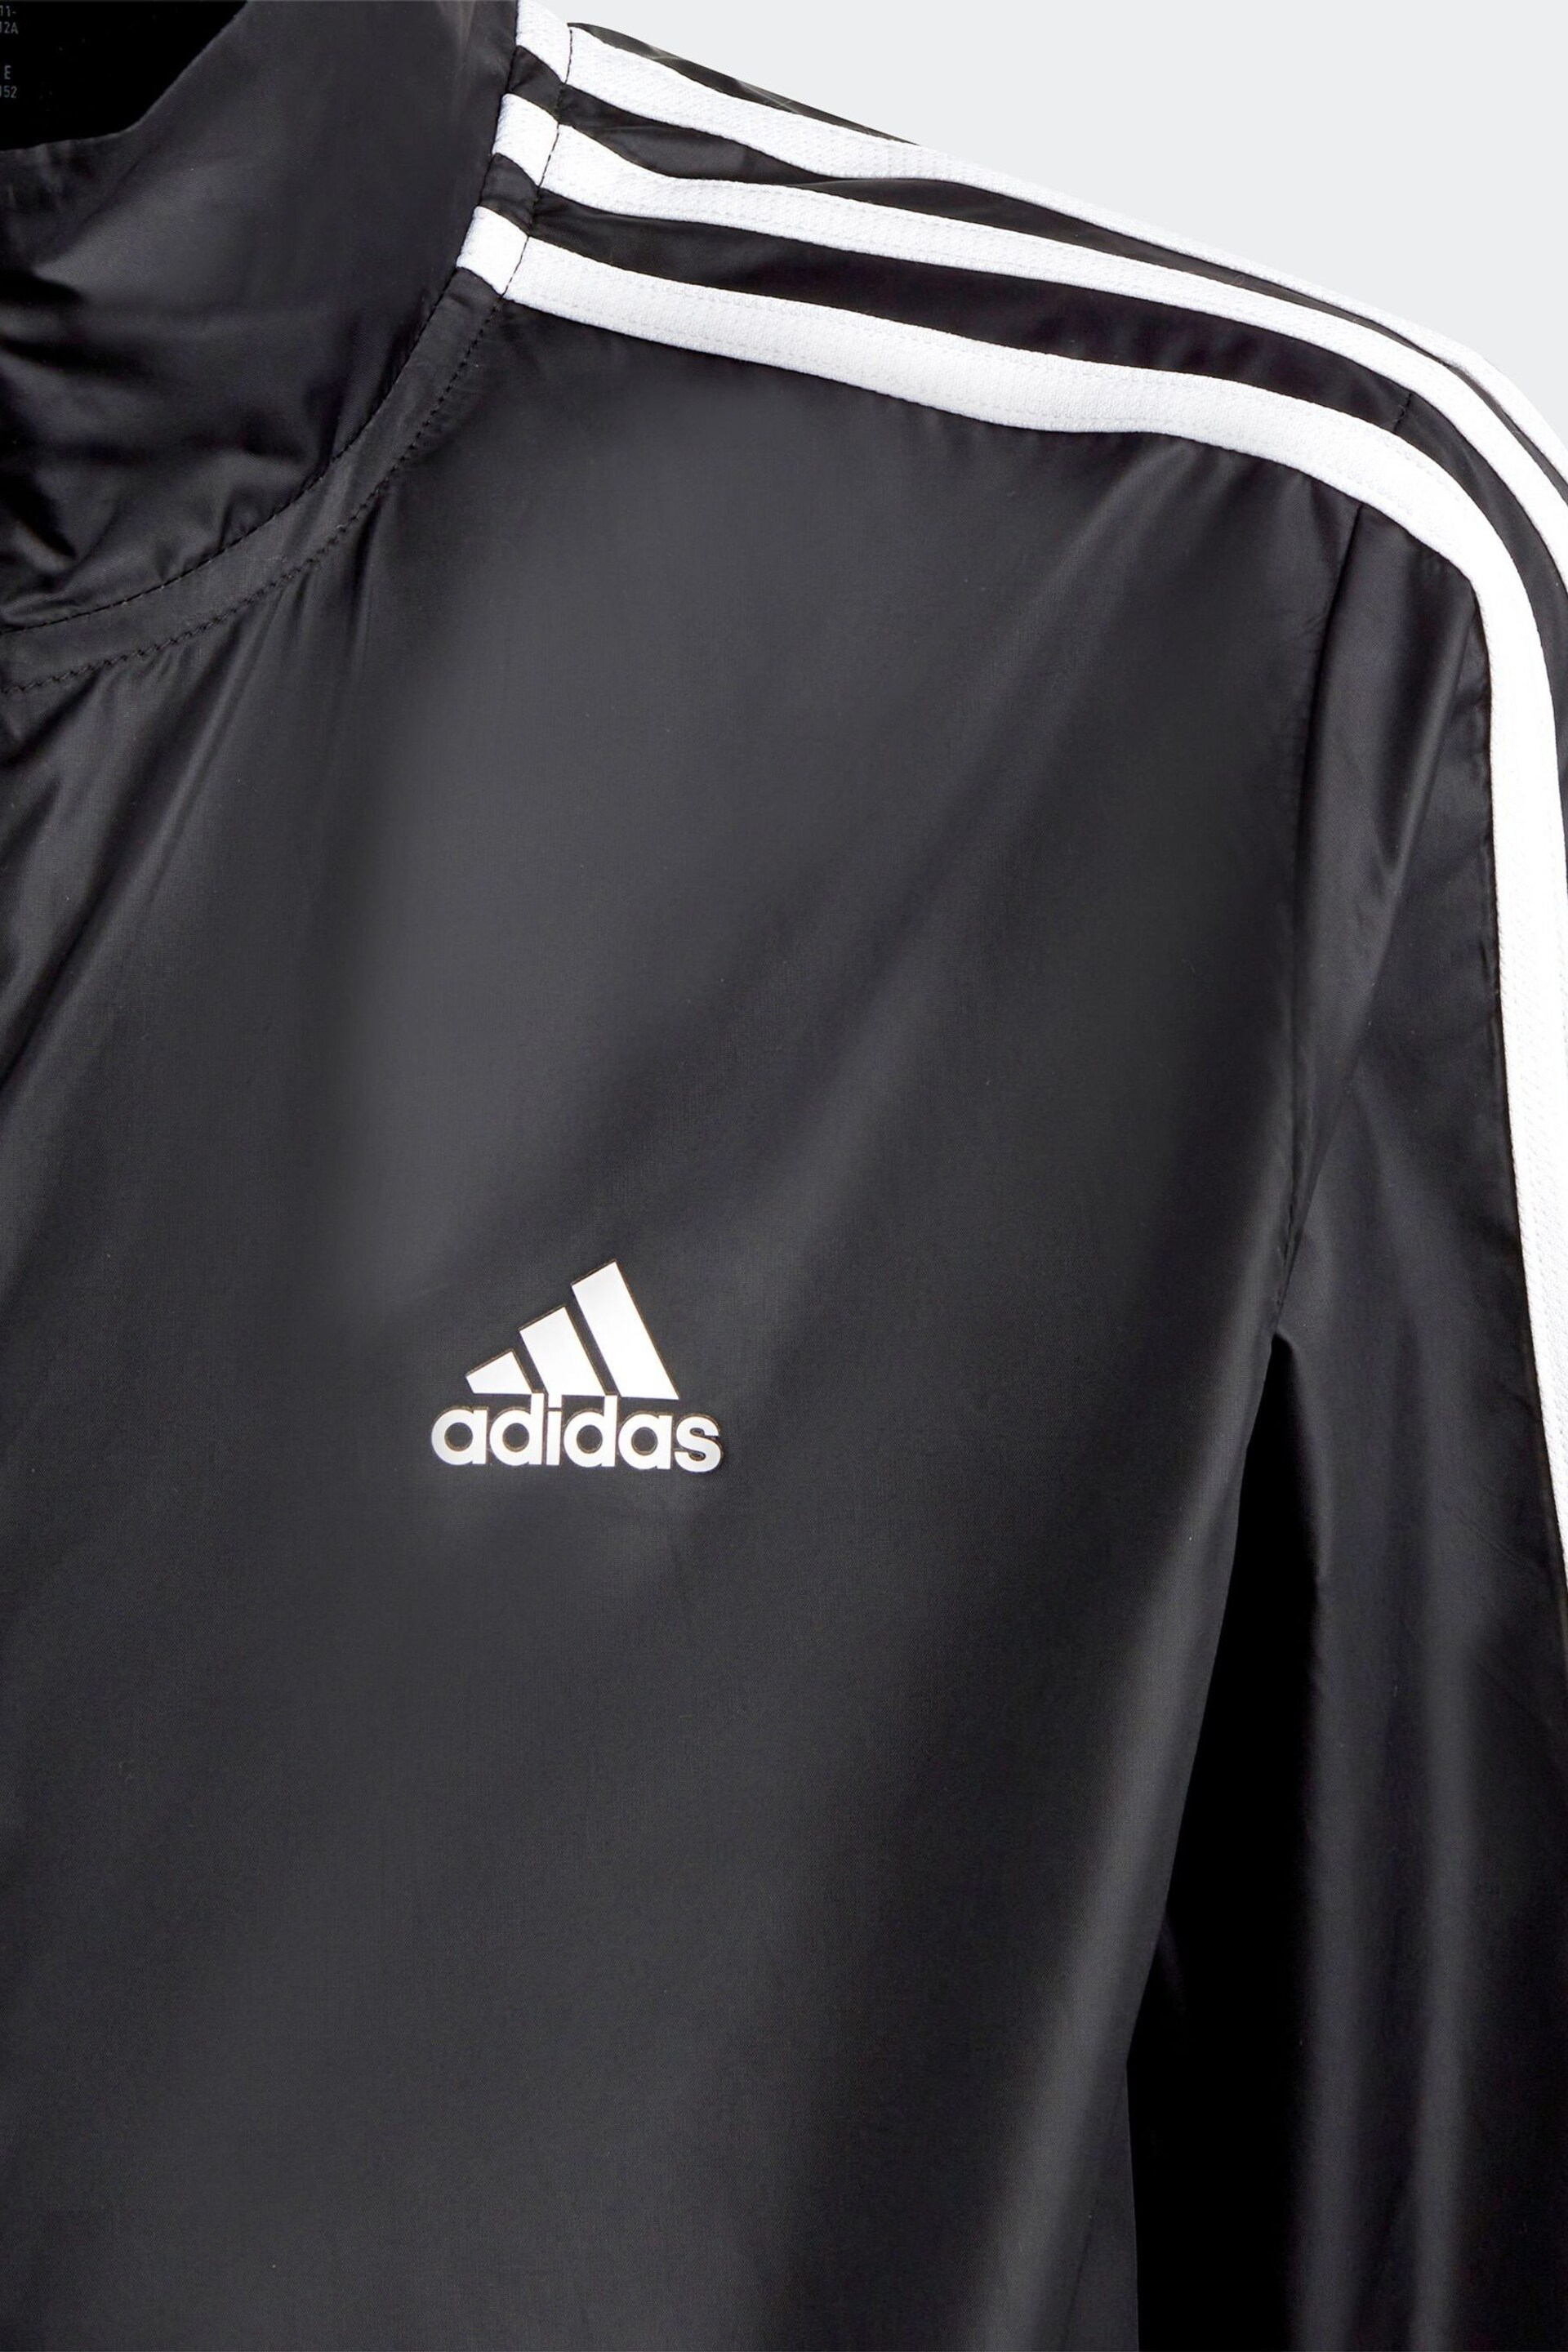 adidas Black Sportswear Essentials 3-Stripes Woven Tracksuit - Image 4 of 6